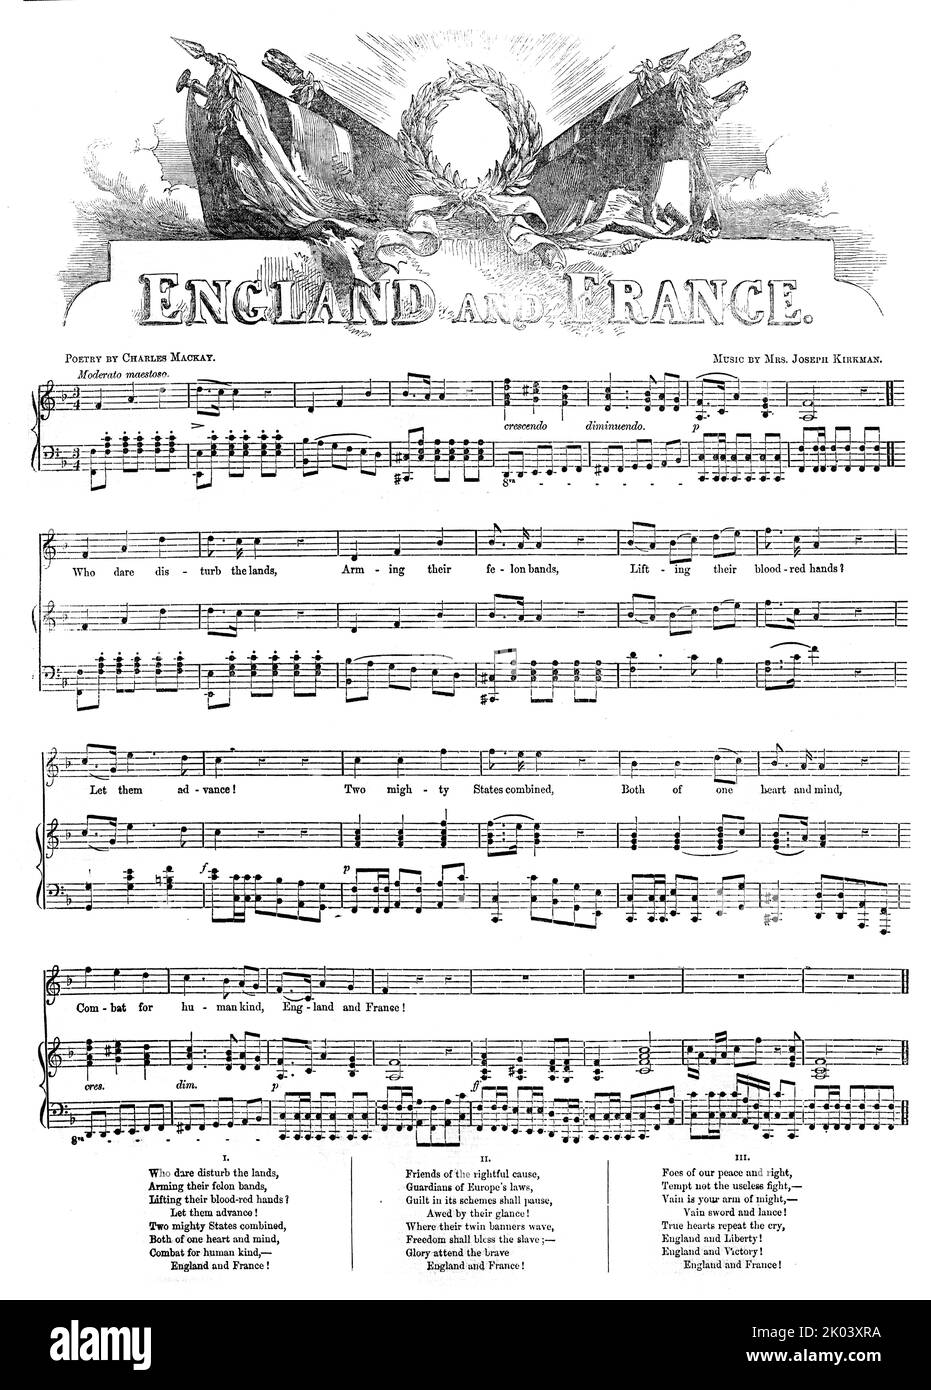 England and France, 1854. Sheet music for a patriotic song, poetry [lyrics] by Charles Mackay, music by Mrs. Joseph Kirkman [Louisa Kirkman?]. 'Who dare disturb the lands, Arming their felon bands, lifting their blood-red hands ] Let them advance! Two mighty States combined, Both of one heart and mind, Combat for human kind, England and France! Friends of the rightful cause, Guardians of Europe's laws, Guilt in its schemes shall pause, Awed by their glance! Where their twin banners wave, Freedom shall bless the slave; Glory attend the brave England and France! Foes of our peace and right, Temp Stock Photo